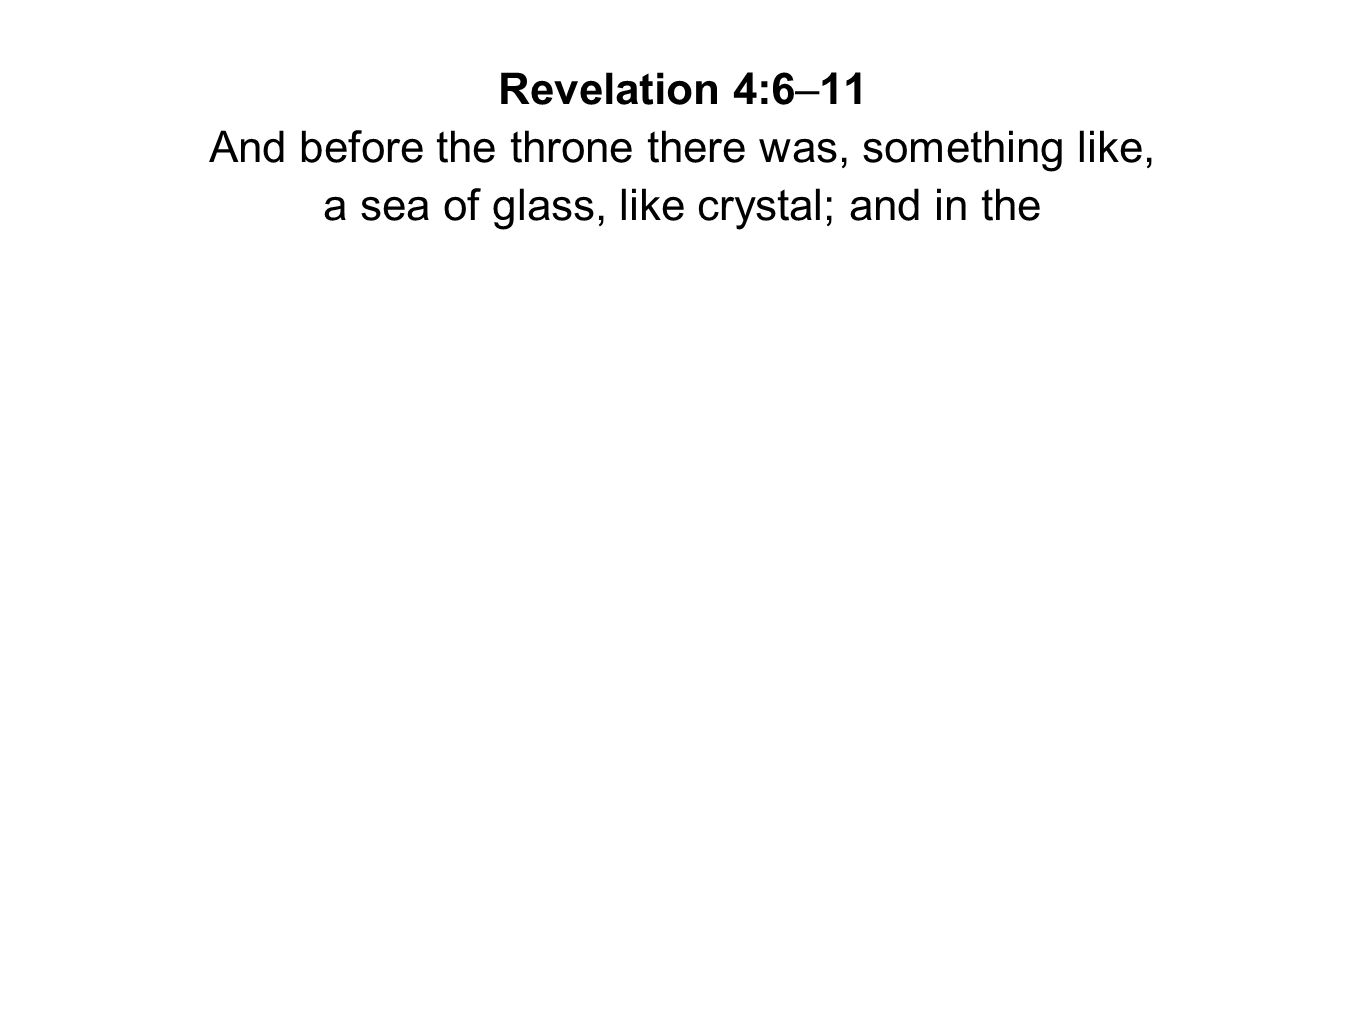 Revelation 4:6–11 And before the throne there was, something like, a sea of glass, like crystal; and in the